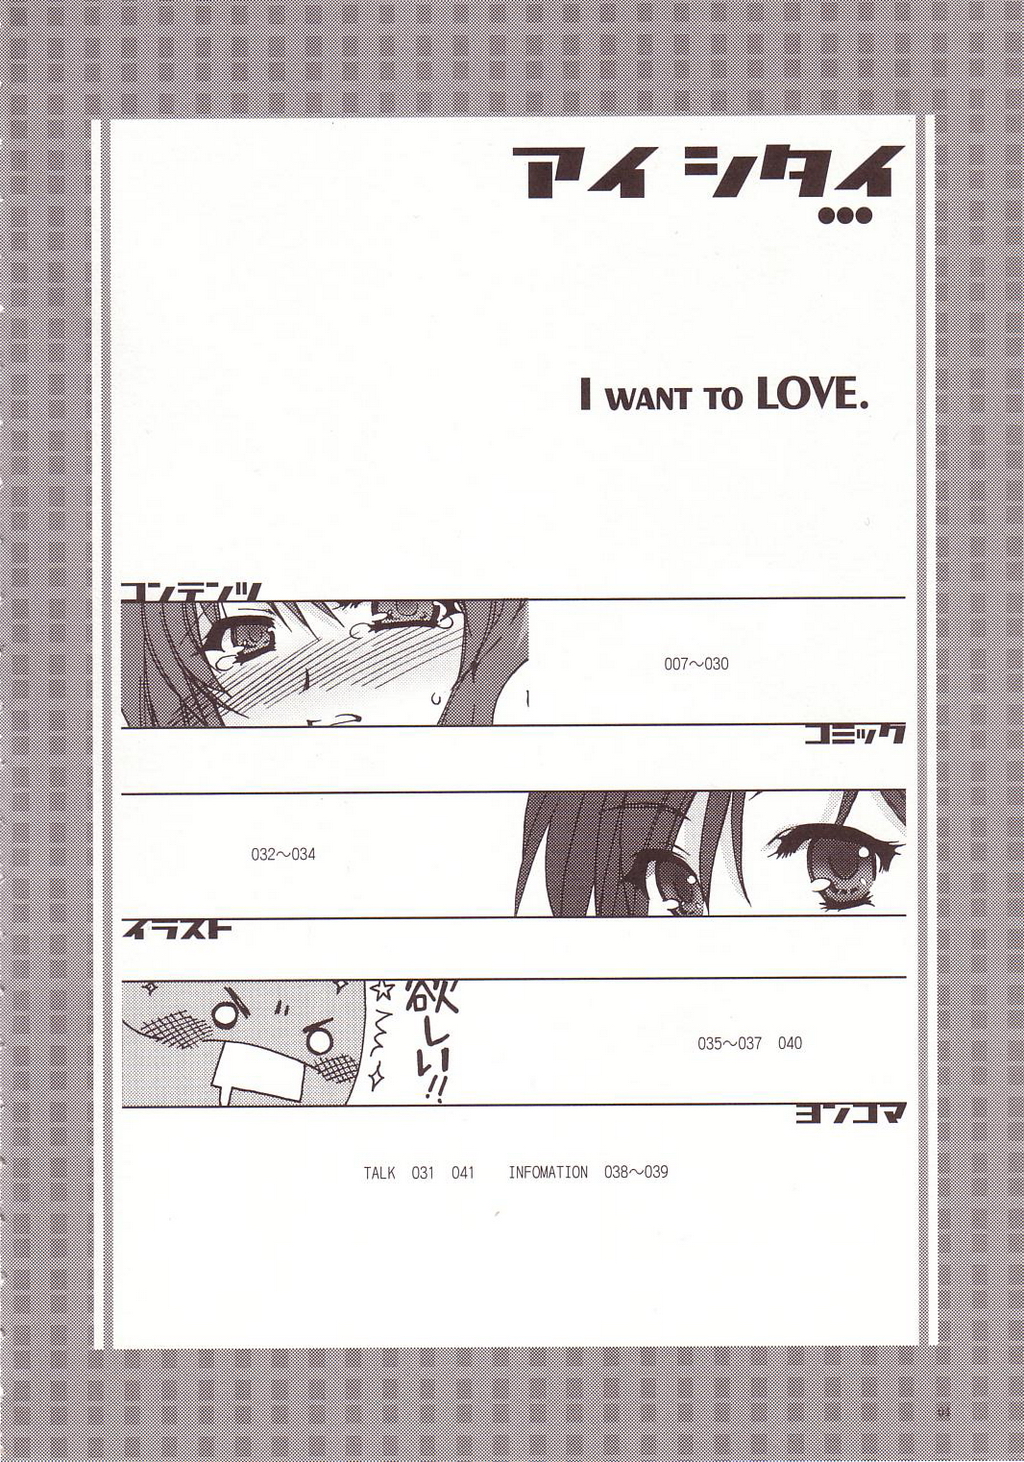 [AKABEi SOFT (Alpha)] Aishitai I WANT TO LOVE (Mobile Suit Gundam Char's Counterattack) page 3 full